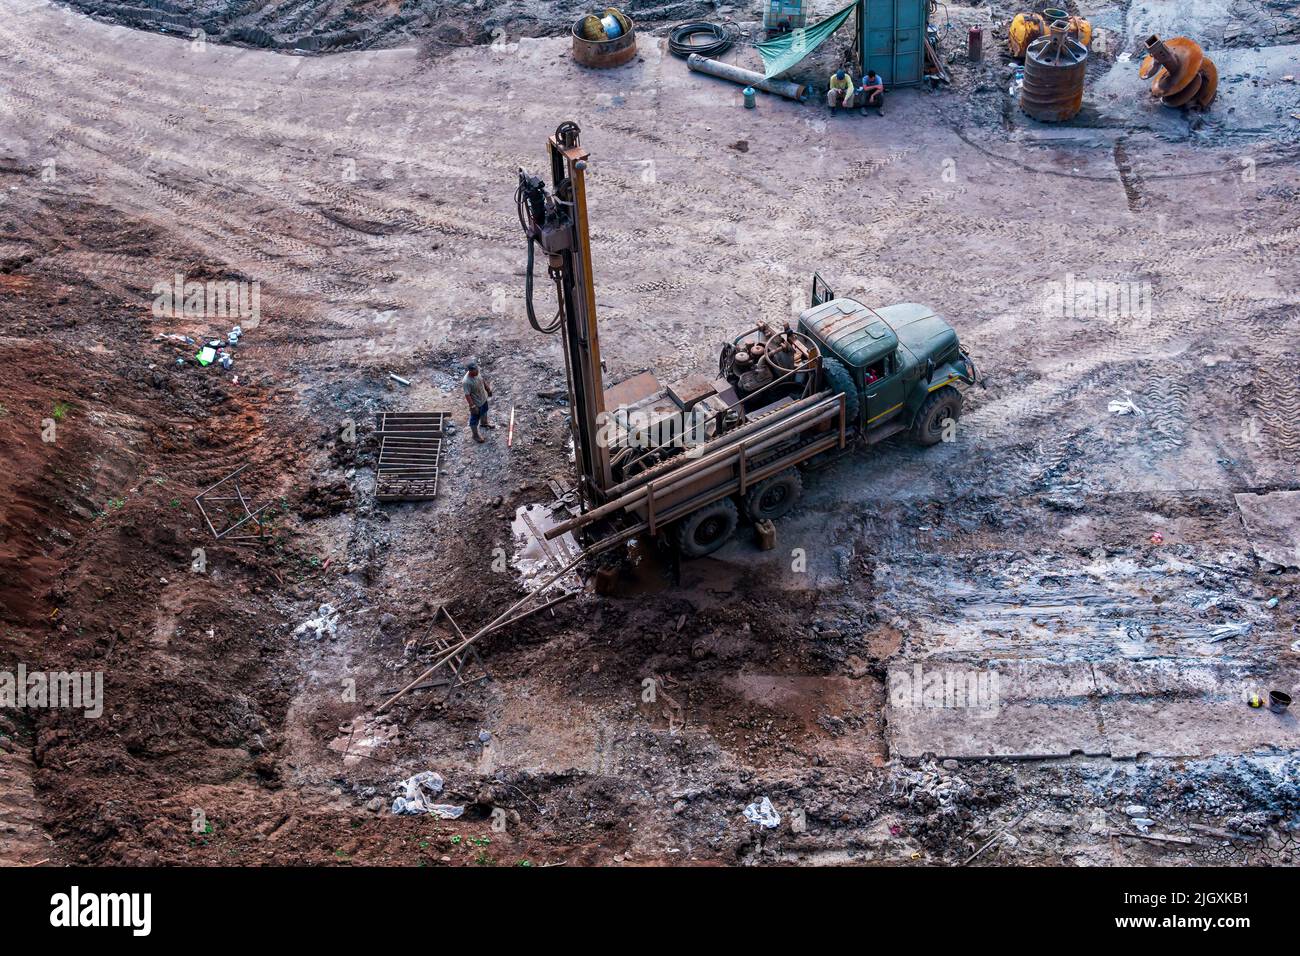 Perm, Russia - July 08, 2022: mobile drilling rig mounted on a truck during operation, top view Stock Photo